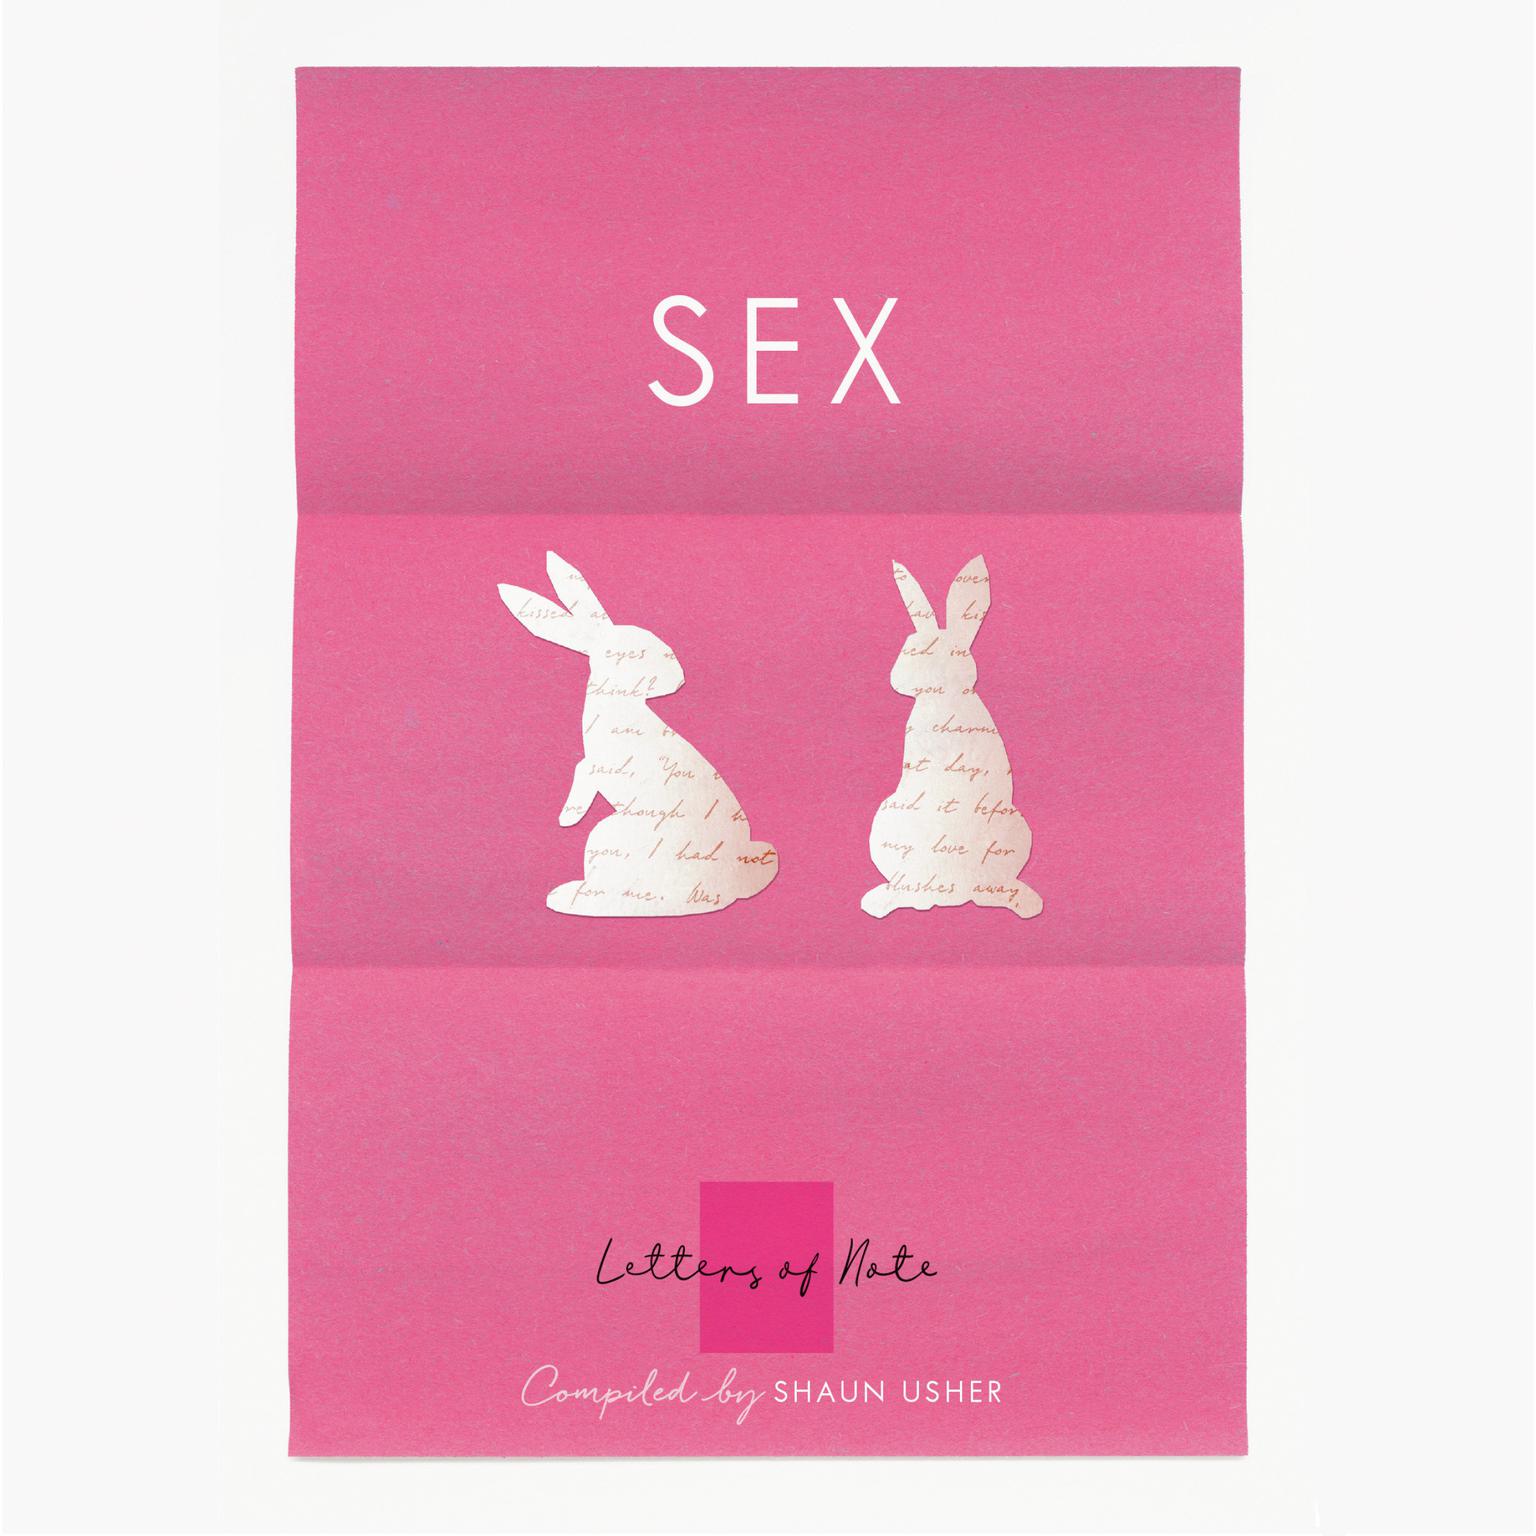 Letters of Note: Sex Audiobook, by Author Info Added Soon